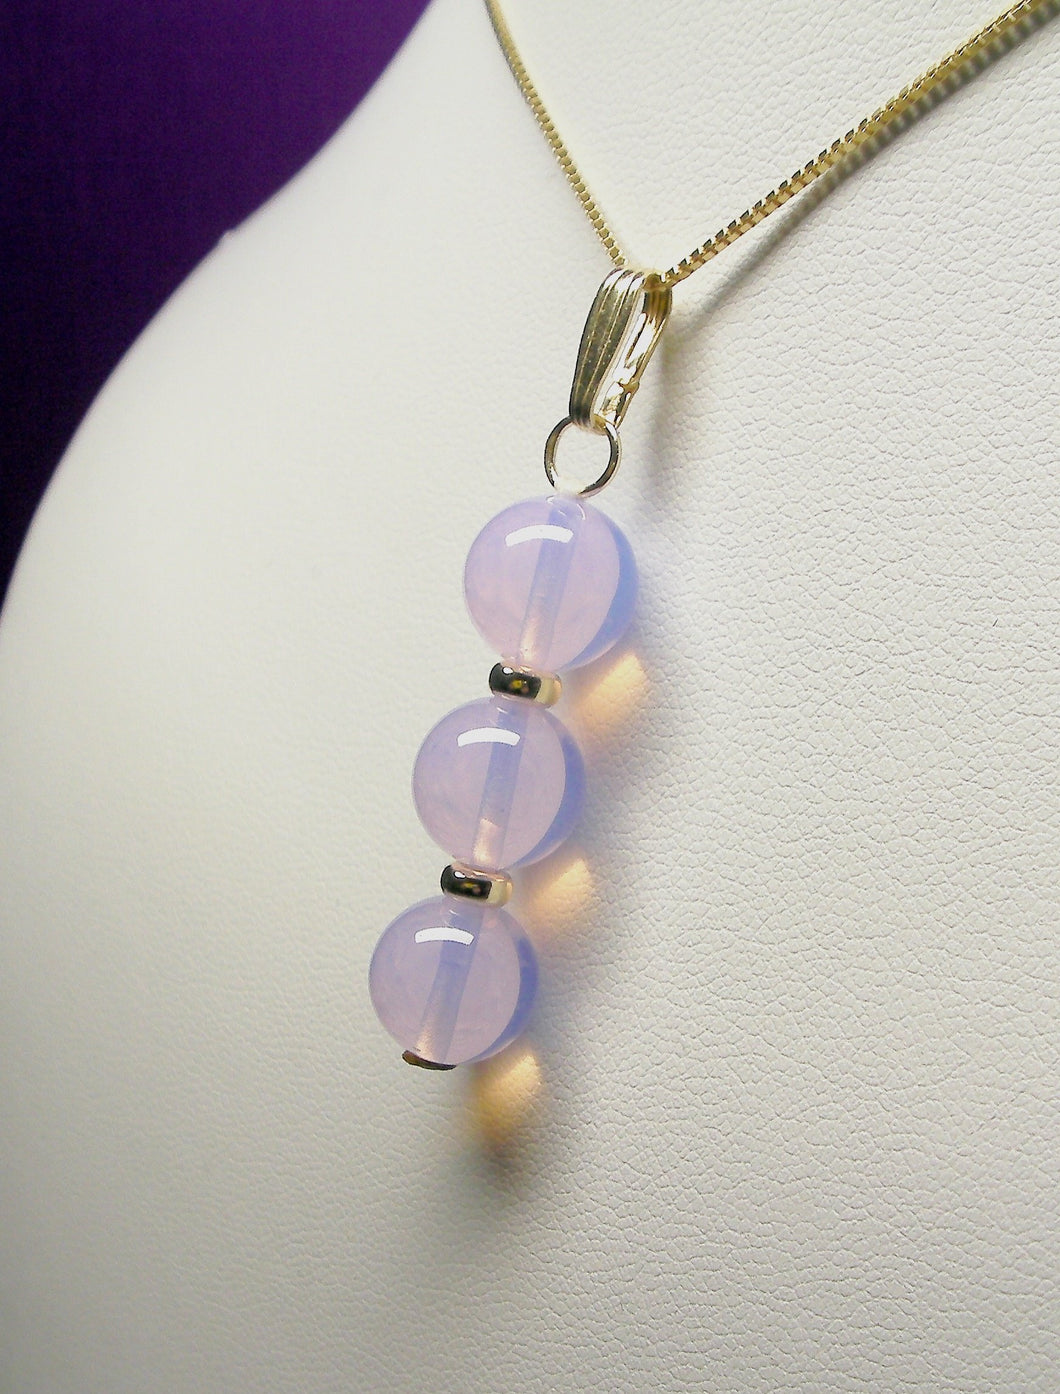 Opalesence Lavender Andara Crystal with Gold Pendant (3 x 10mm)